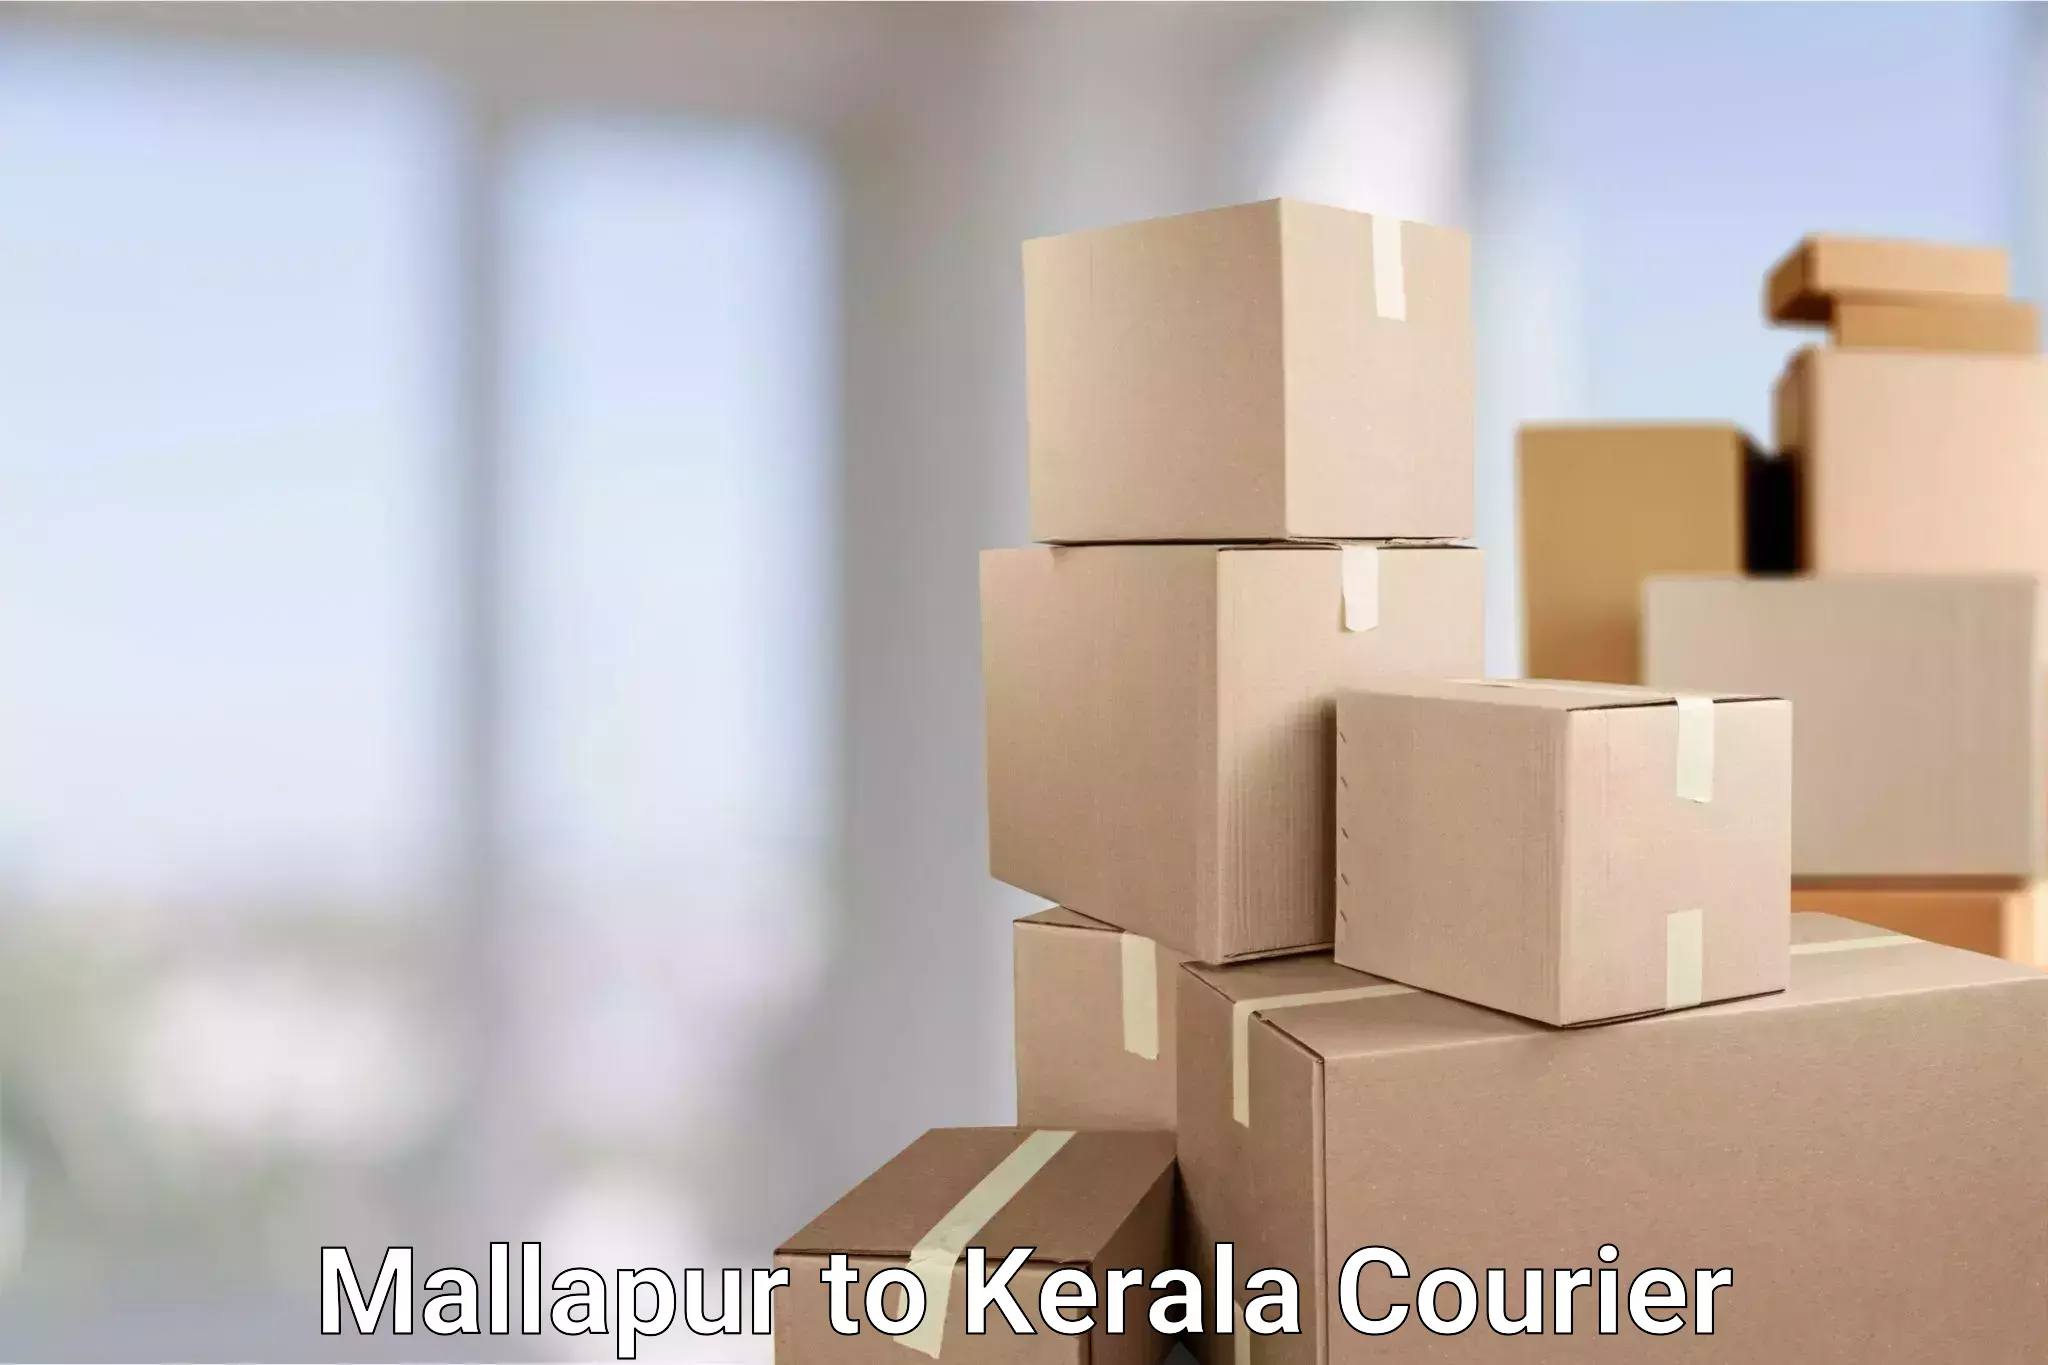 Sustainable shipping practices Mallapur to Kerala